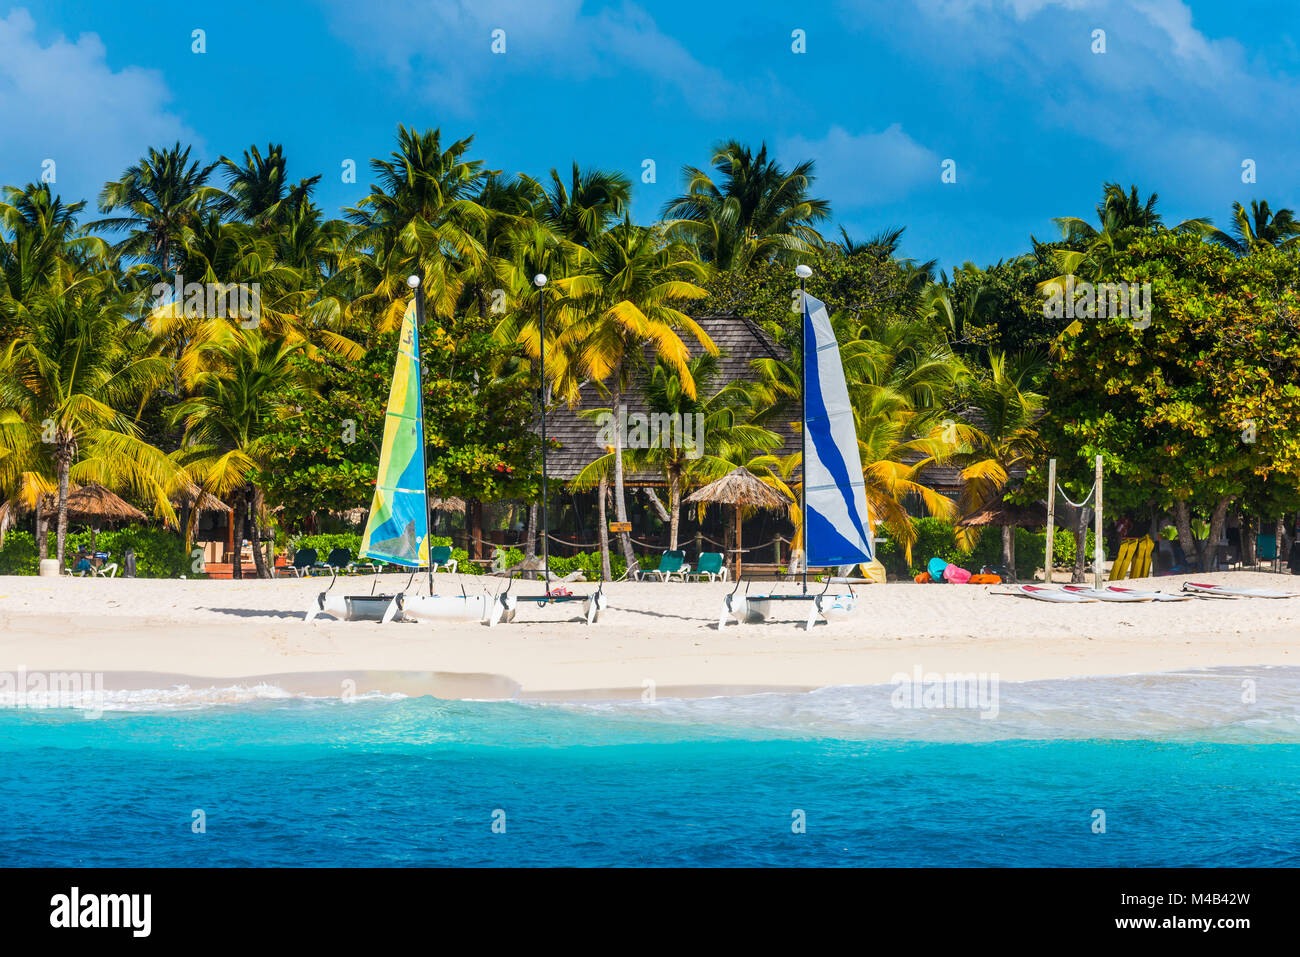 Catamarans on a beautiful palm fringed white sand beach on Palm island,Grenadines islands,St. Vincent and the Grenadines,Caribbean Stock Photo